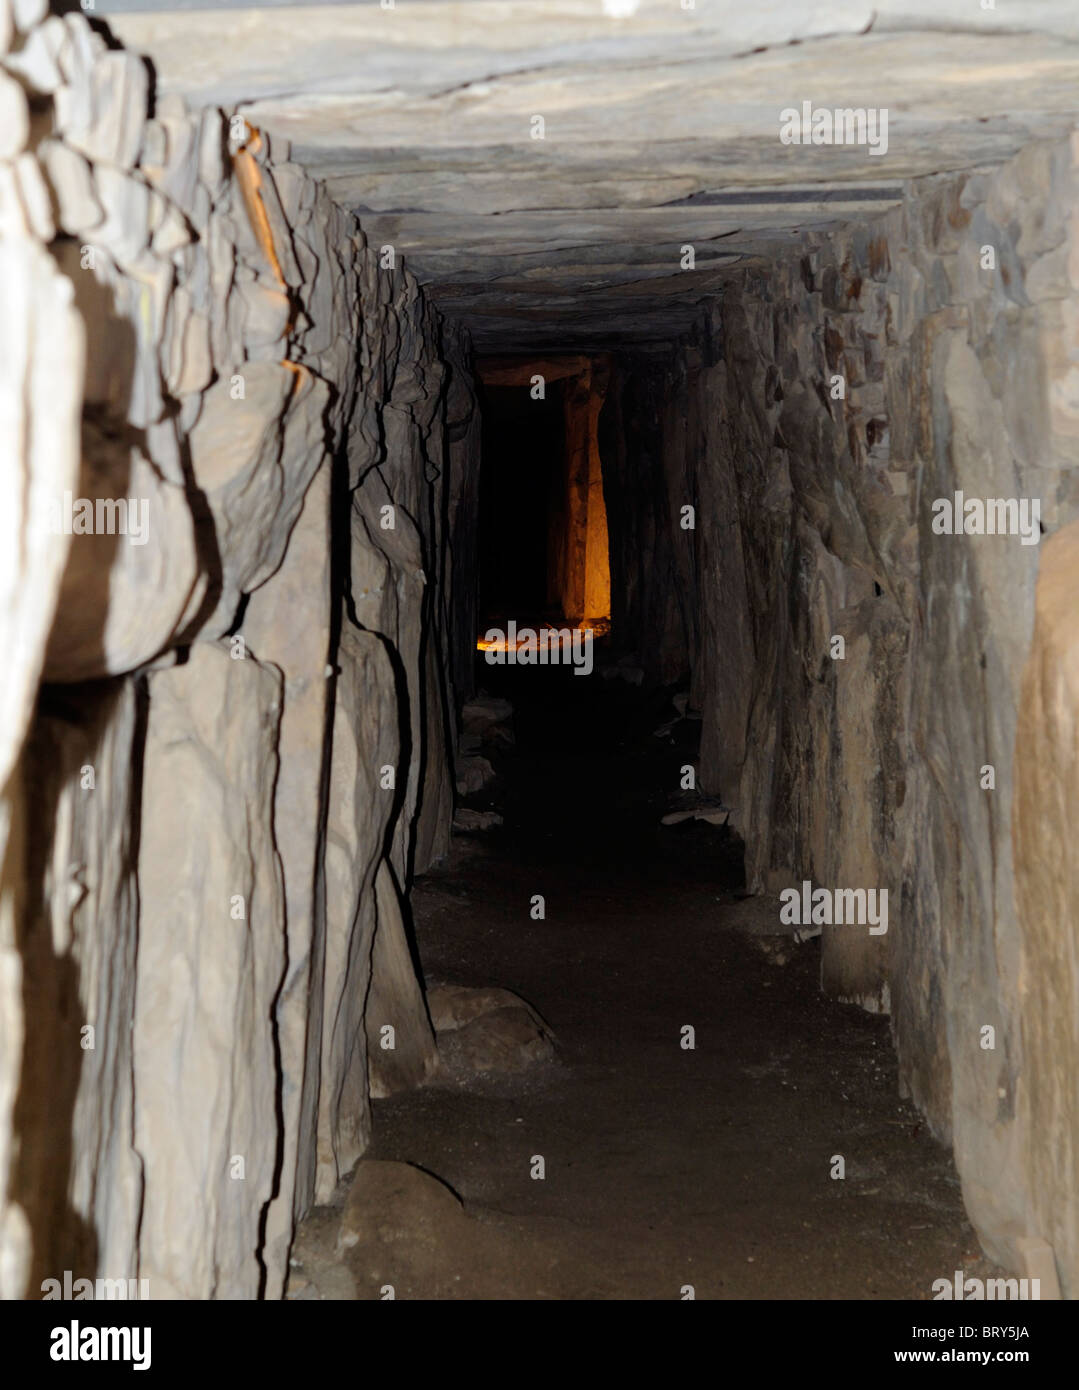 illuminated chamber Knowth neolithic passage tomb  boyne valley county meath ireland world heritage site archaeological equinox Stock Photo